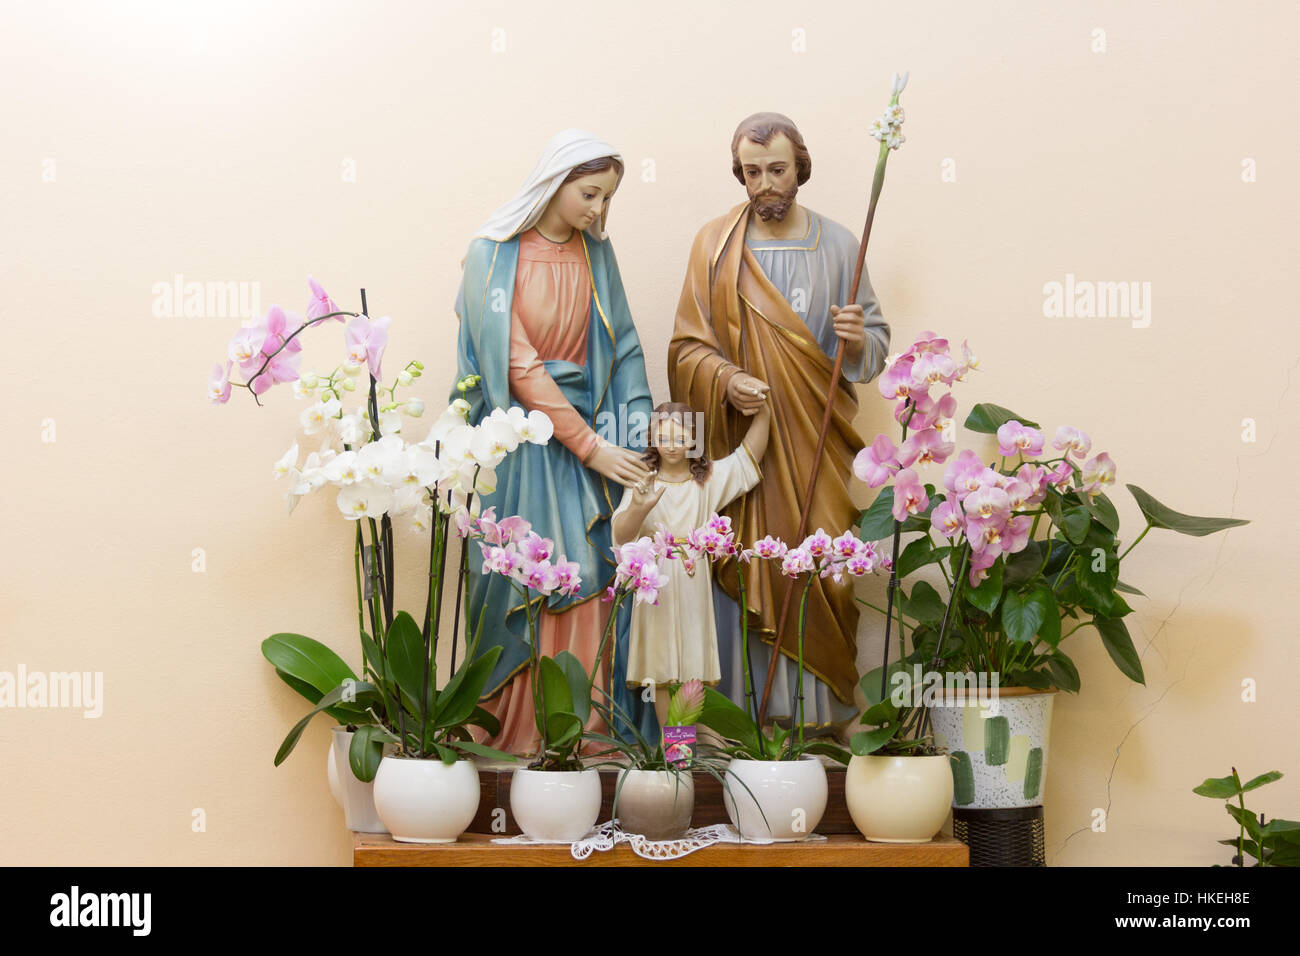 MEDJUGORJE, BOSNIA AND HERZEGOVINA, August 21 2016. The statue of the Holy family - Jesus, Mary and Joseph surrounded by white and pink orchids. Stock Photo